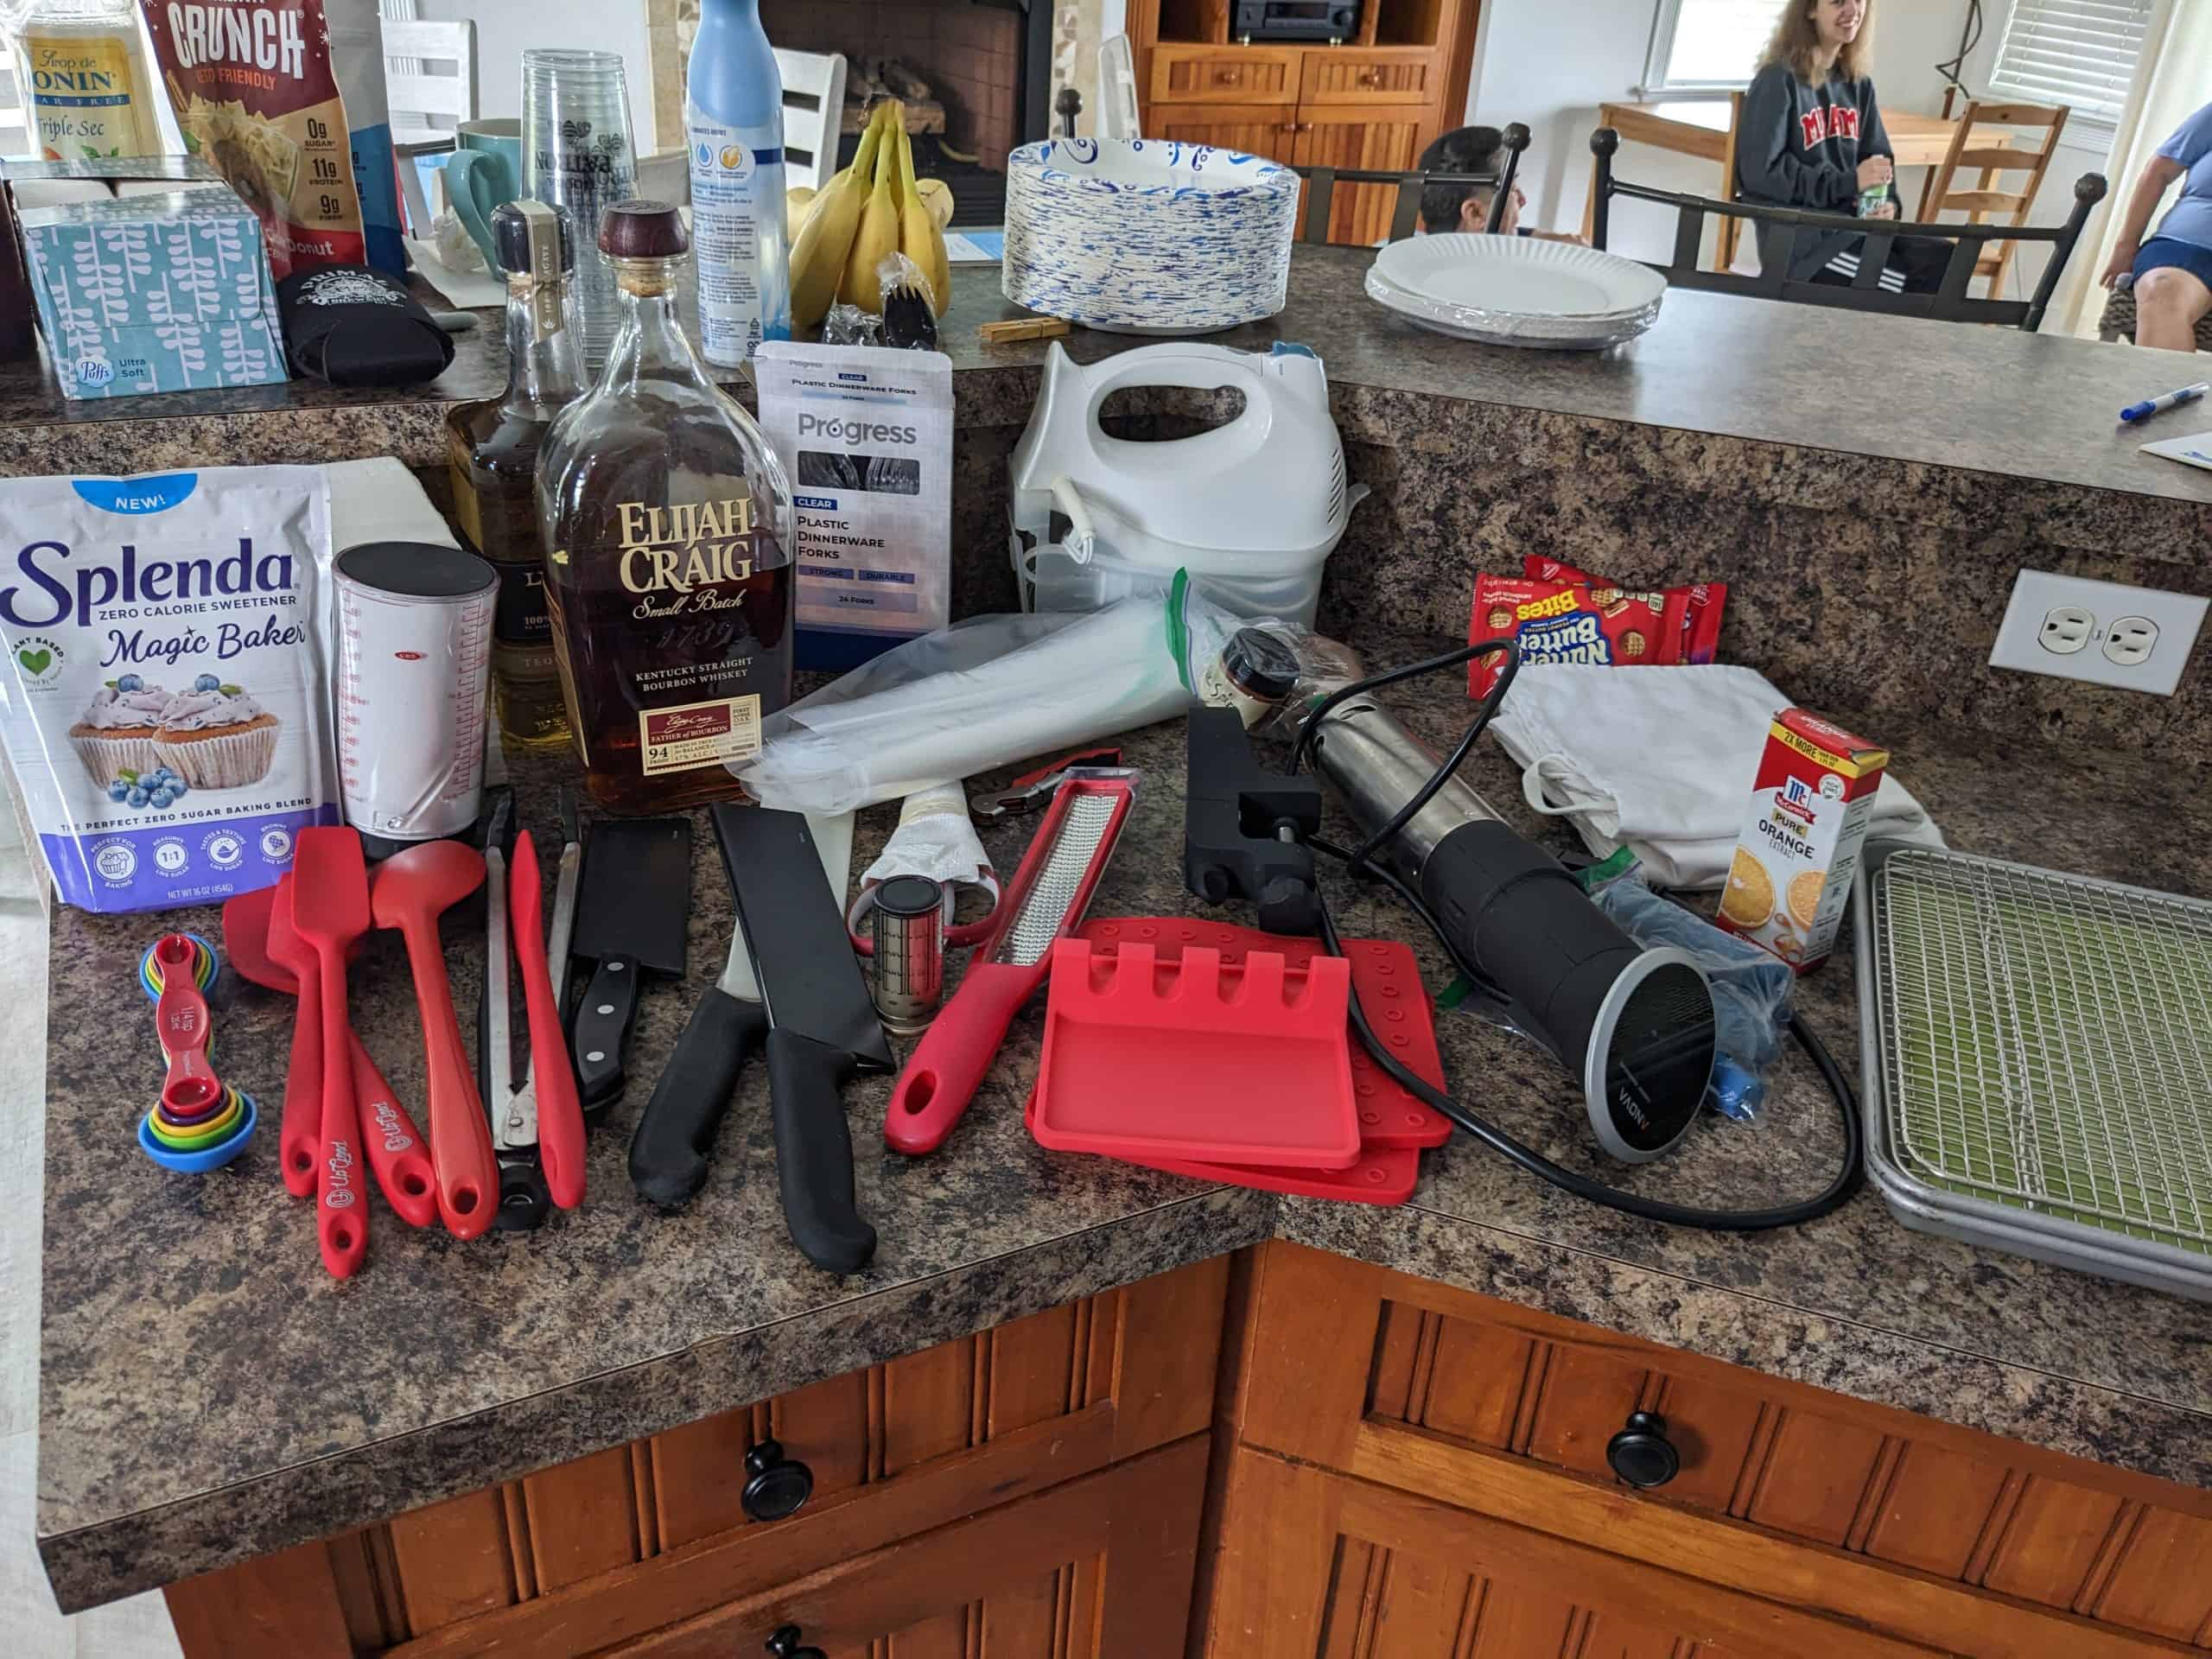 Kitchen Essentials for a vacation rental house arrayed on a countertop